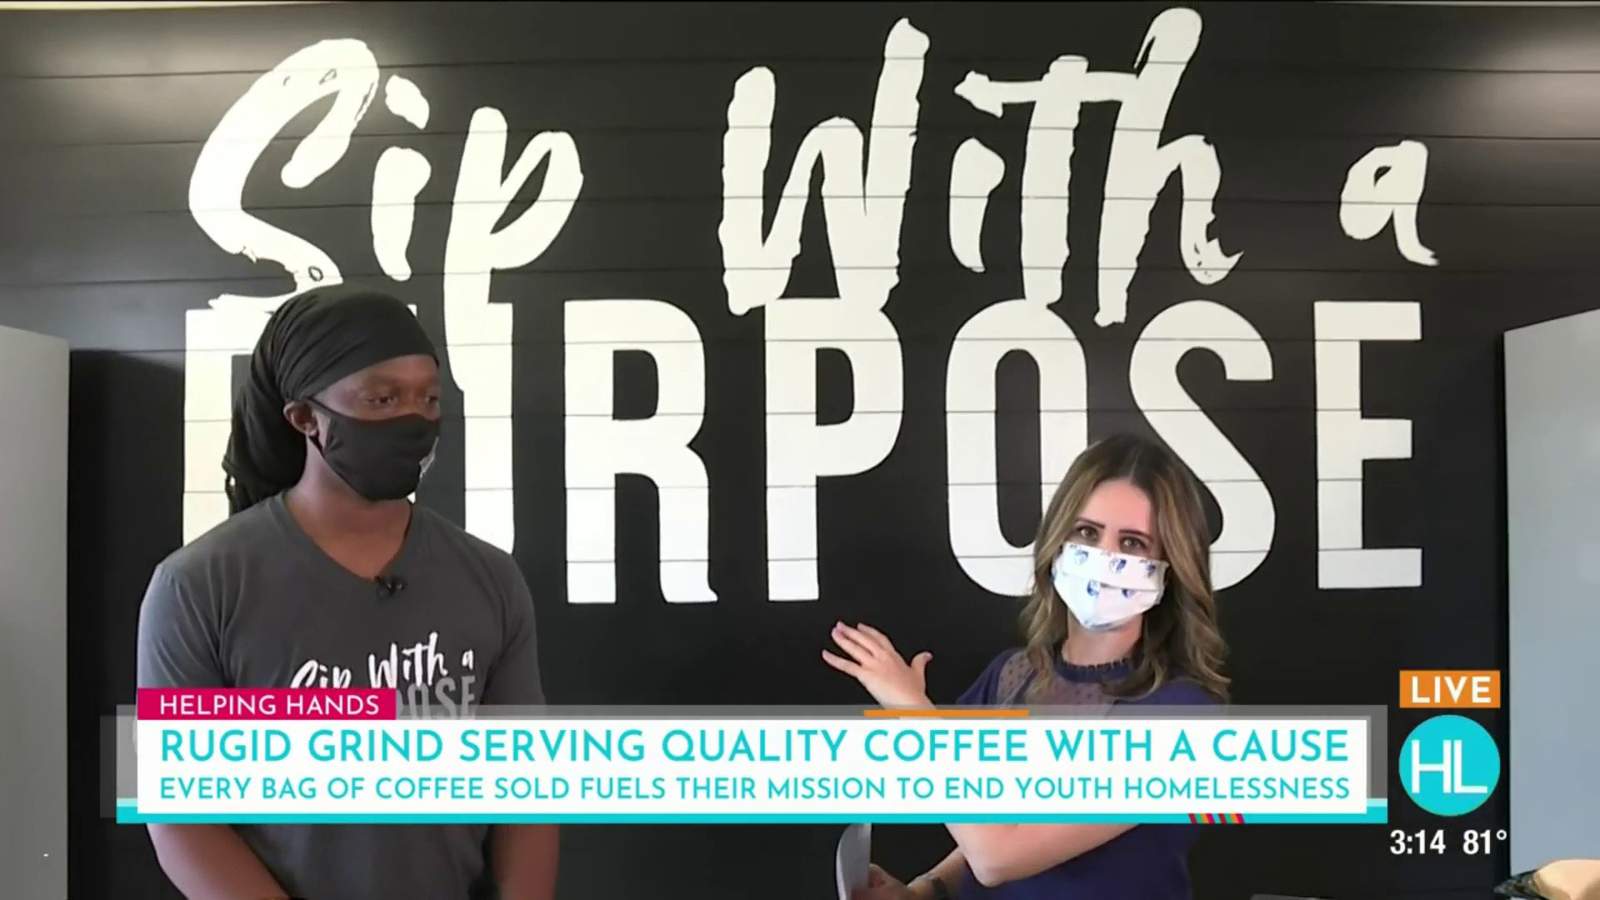 Rugid Grind brews every bag of coffee to help end teenage homelessness in the Houston area